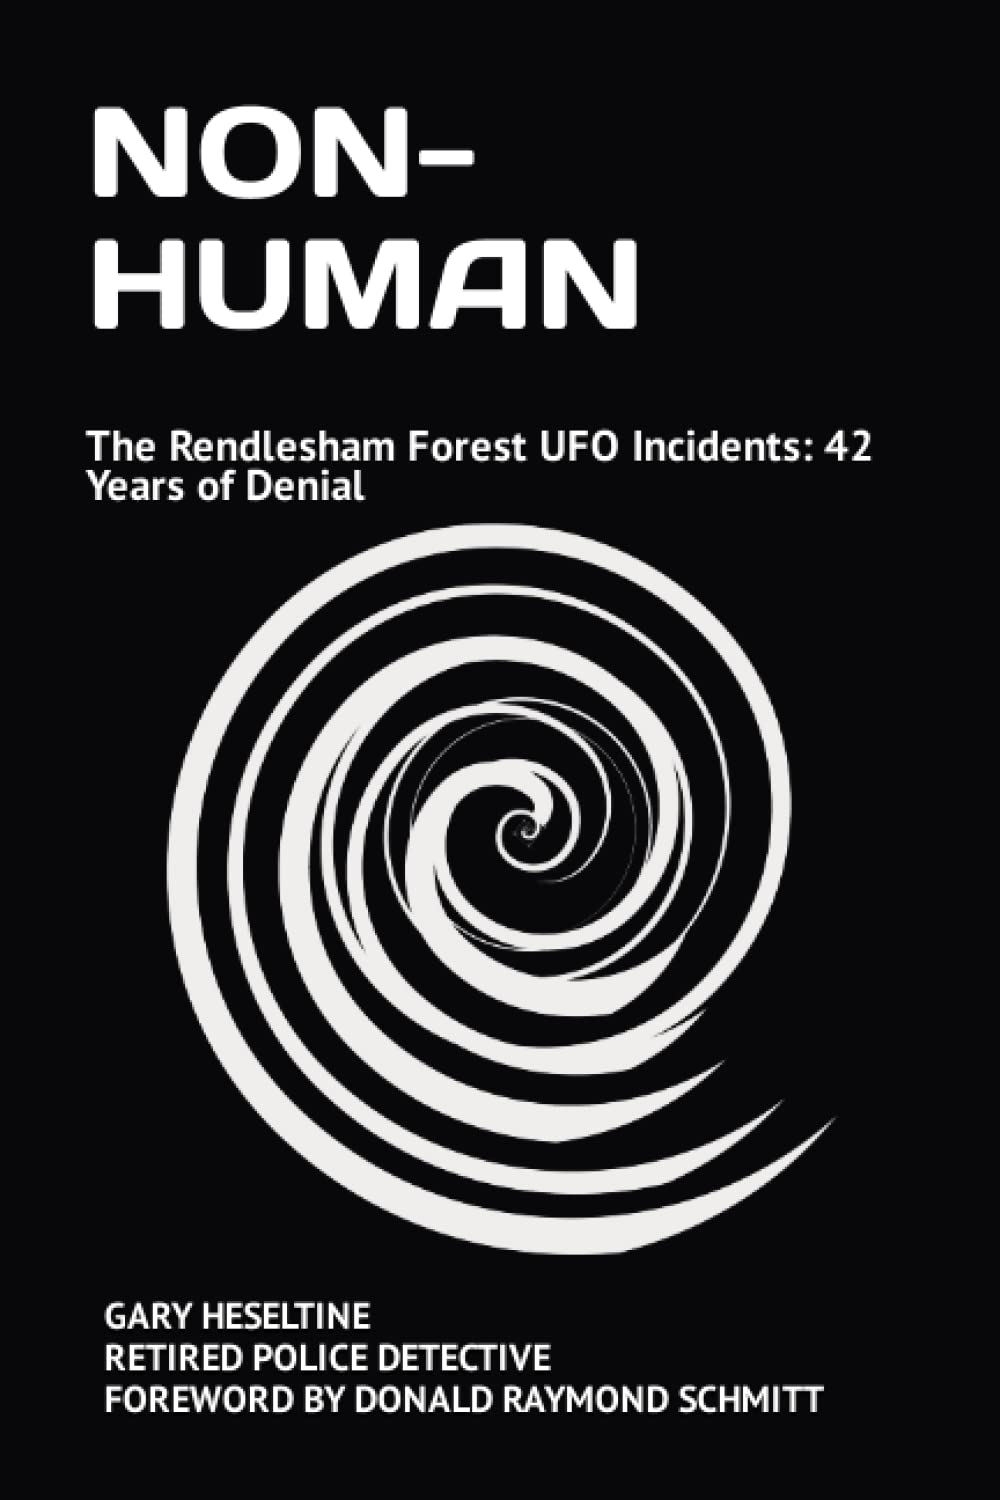 NON-HUMAN: The Rendlesham Forest UFO Incidents: 42 Years of Denial